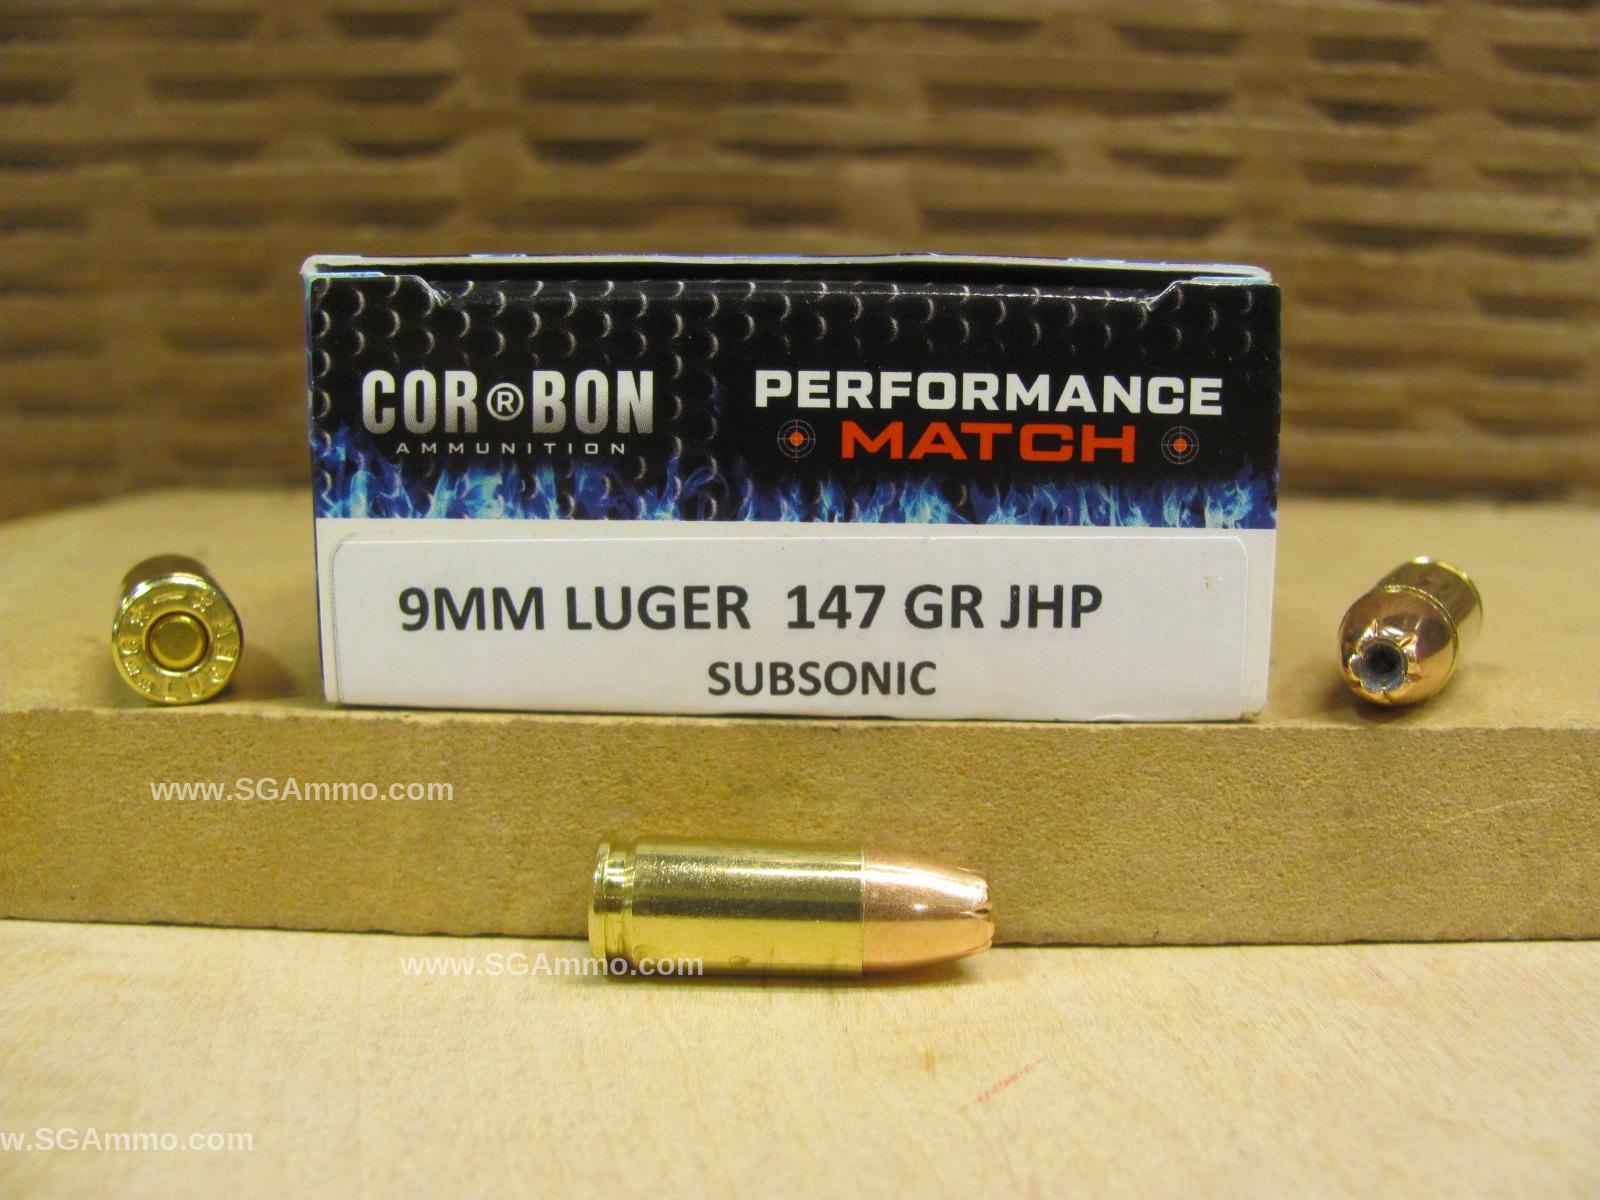 500 Round Can - 9mm Luger 147 Grain JHP Subsonic Corbon Performance Match Ammo - Packed in M19A1 Canister